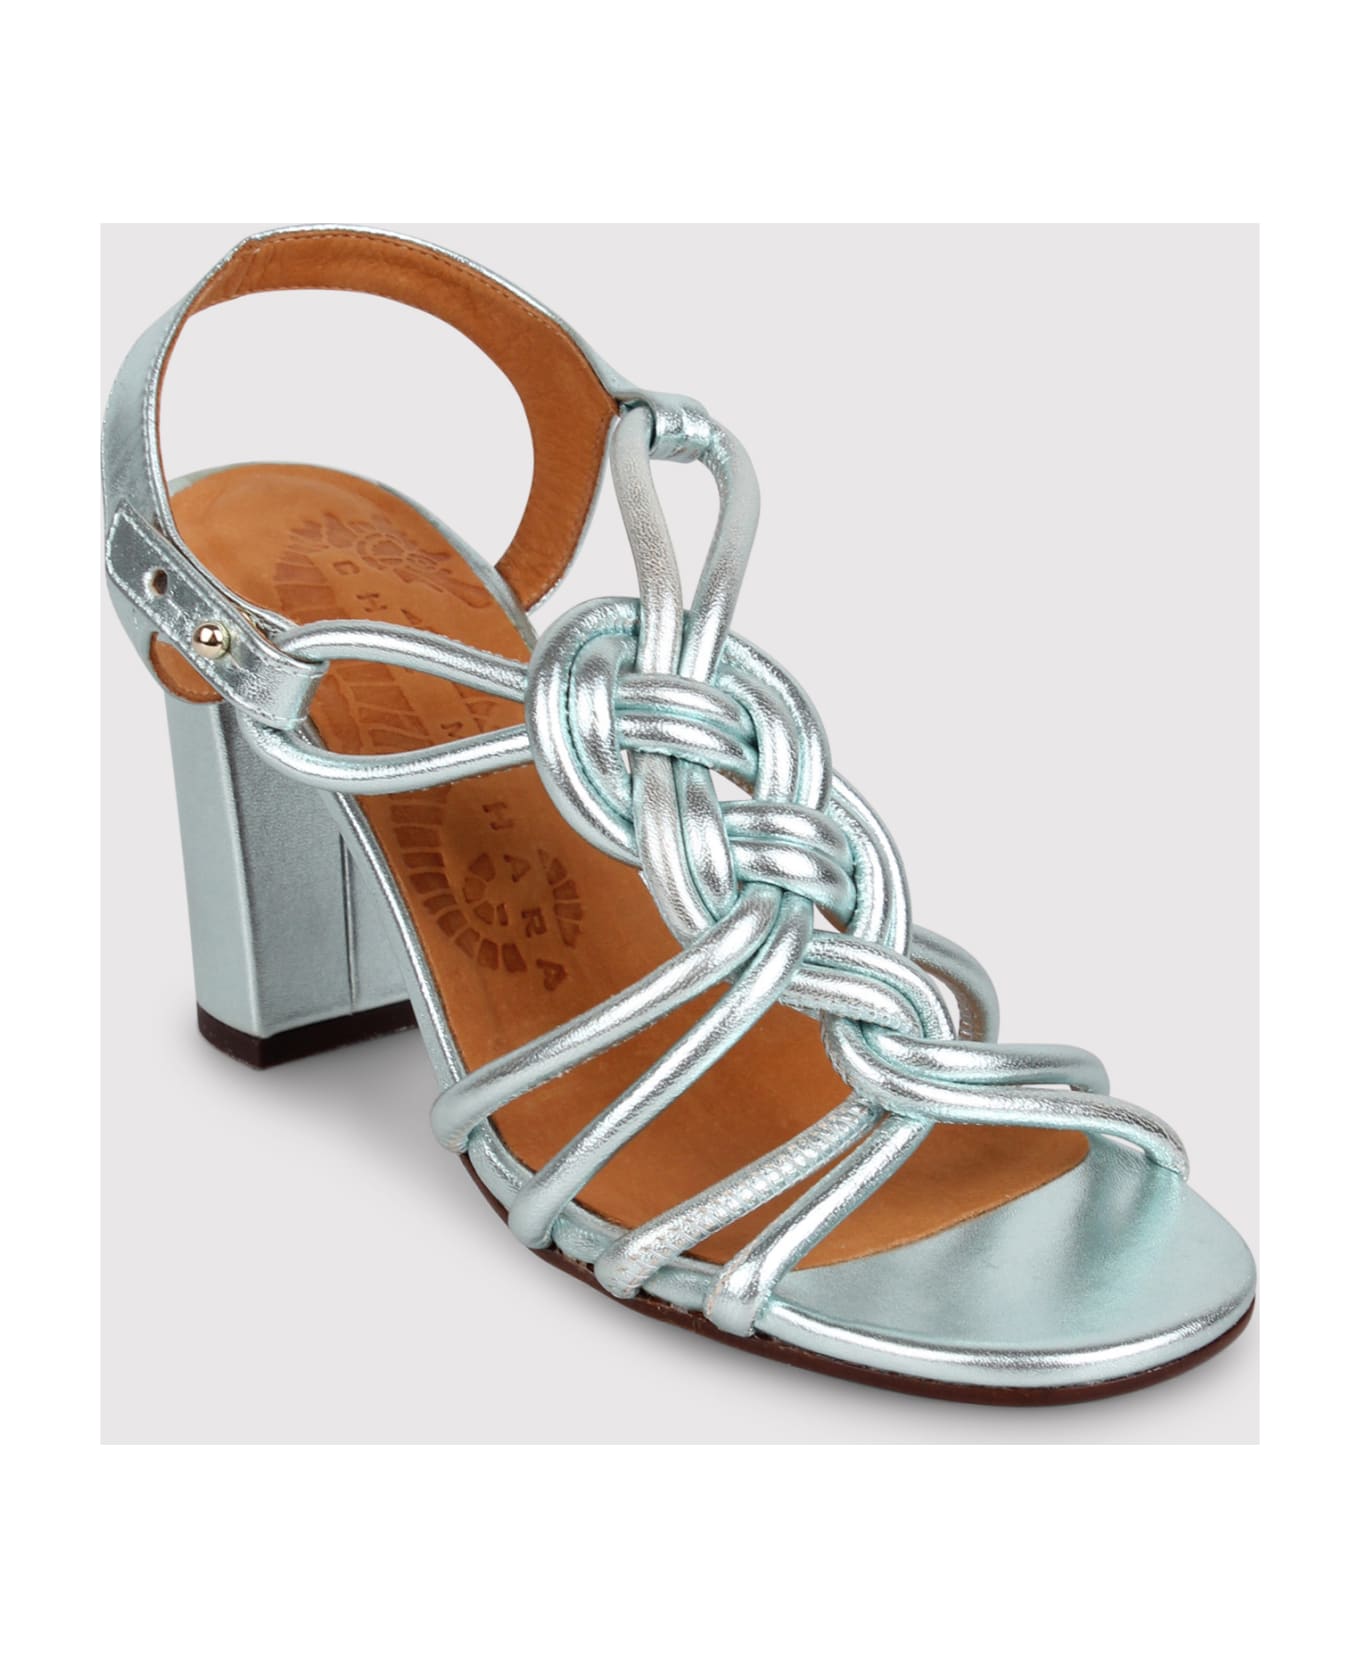 Chie Mihara Bane 85mm Leather Sandals サンダル